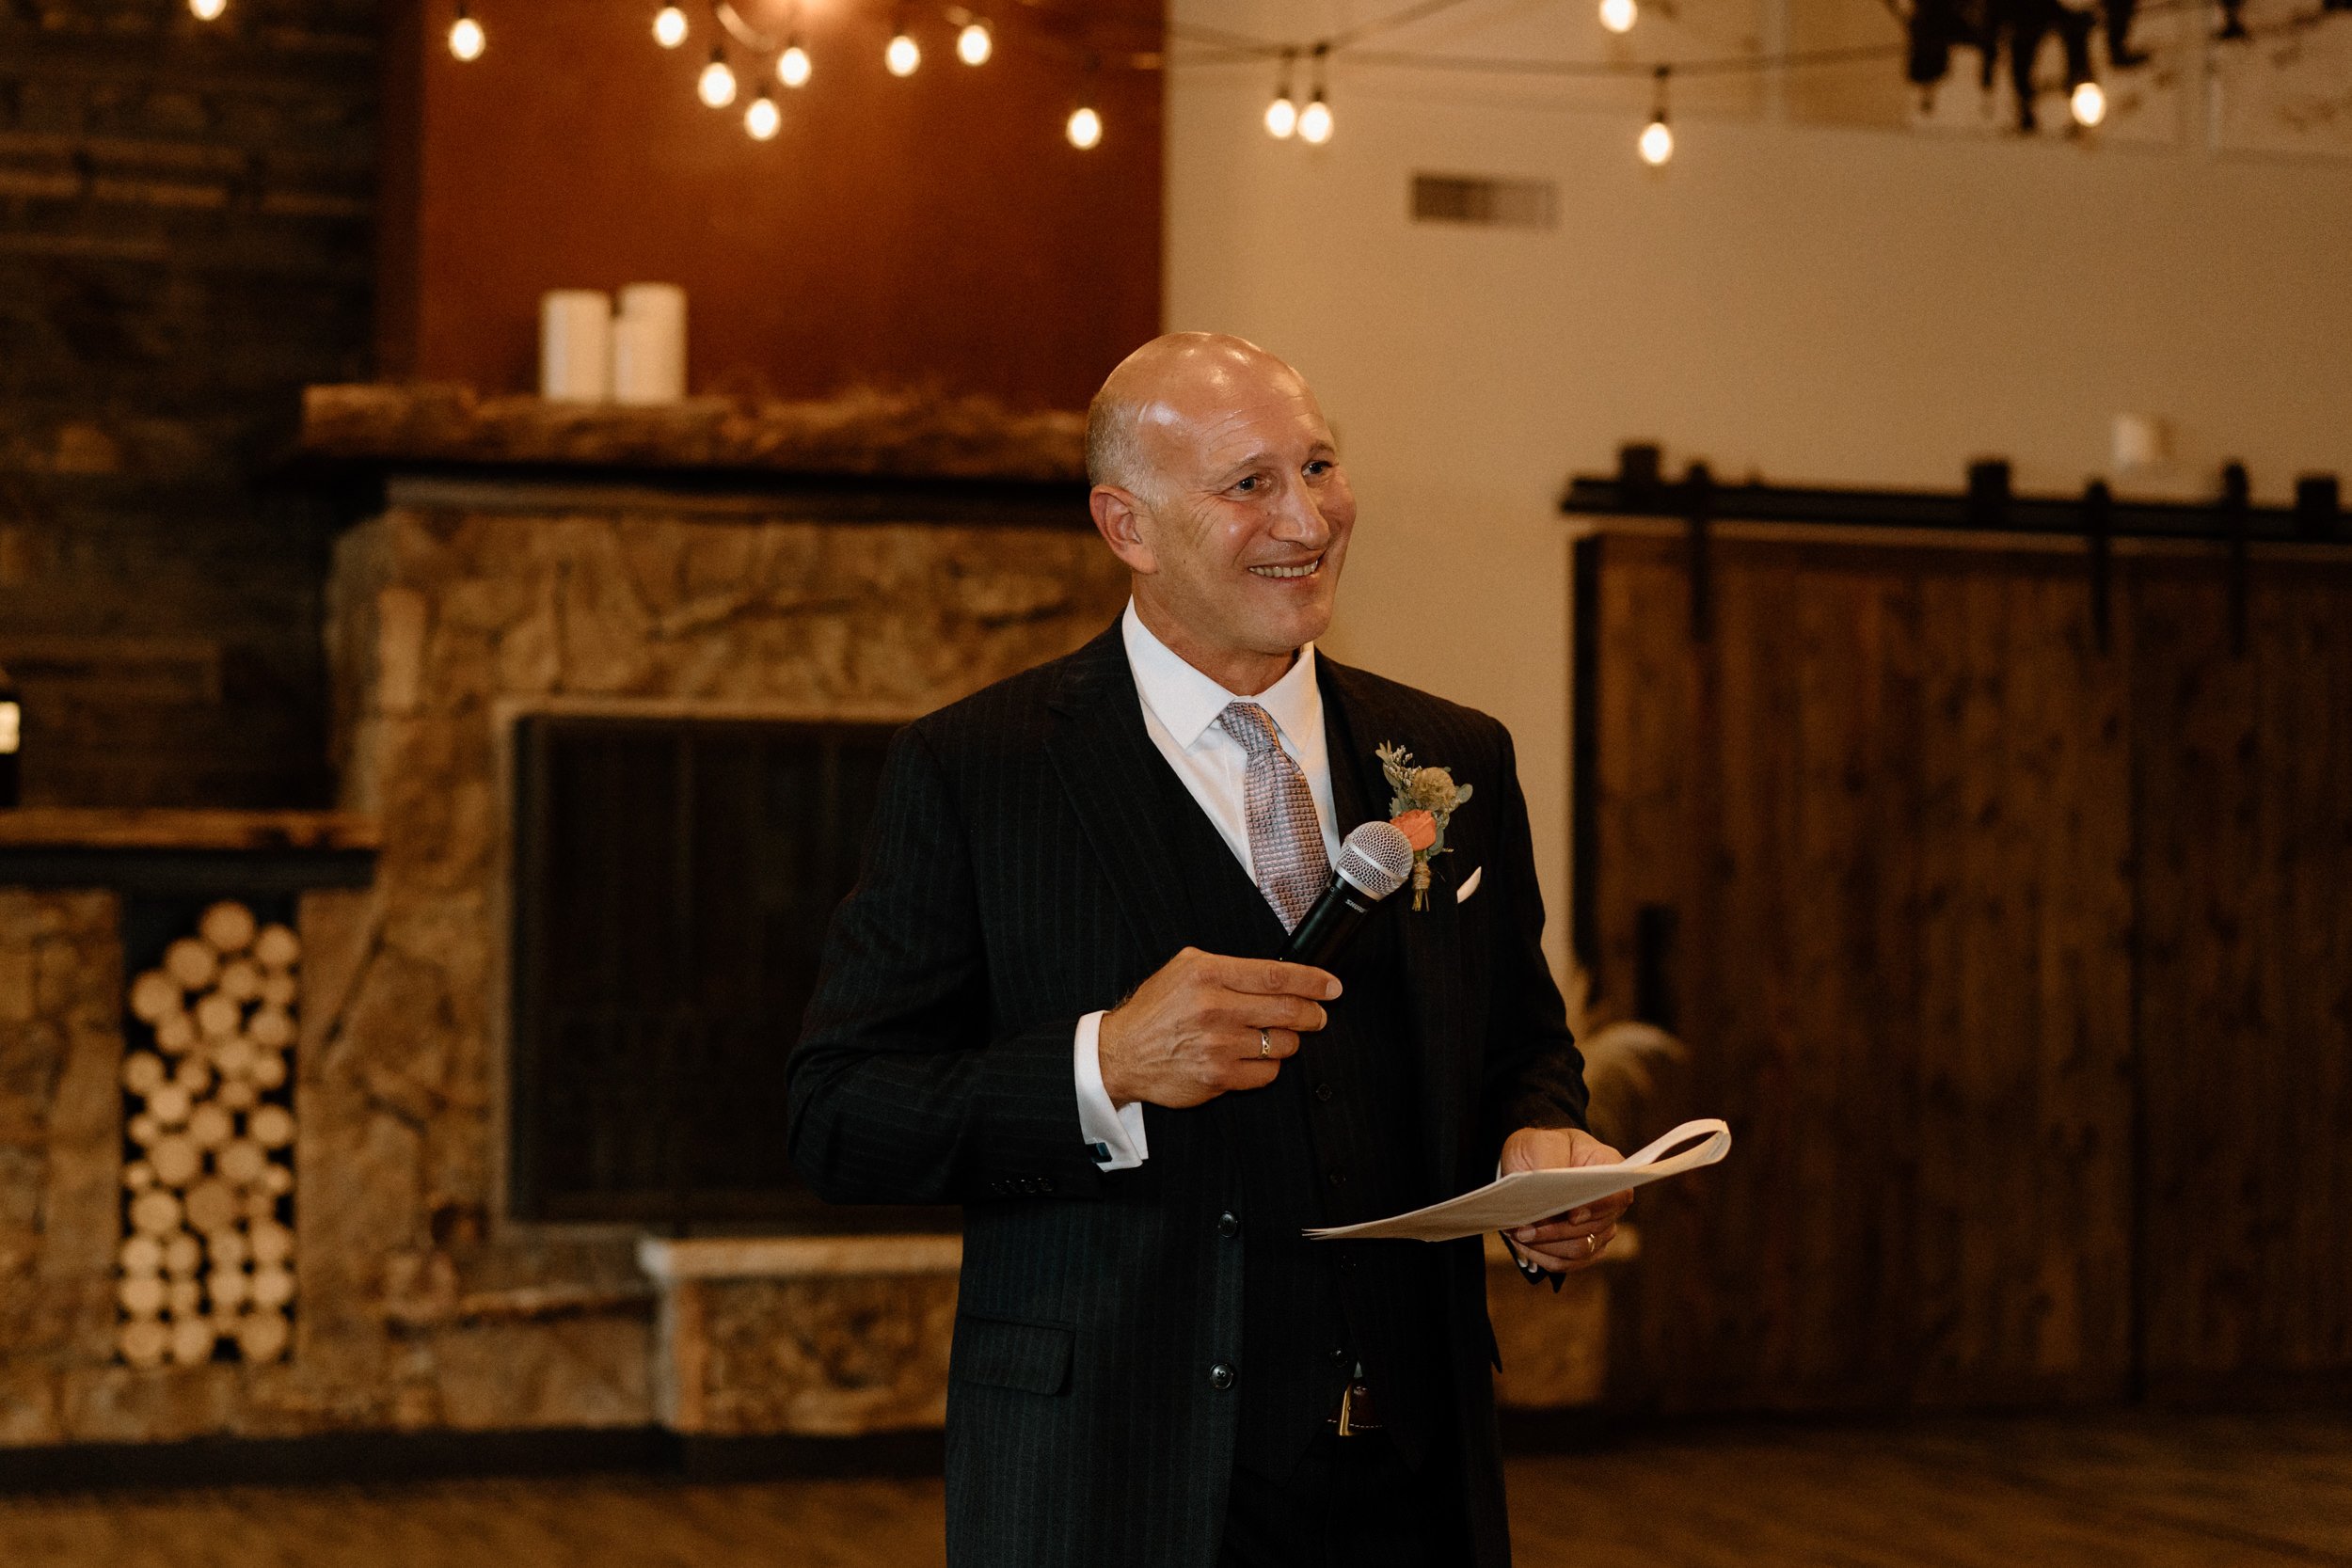 Father of the bride smiles while making a toast